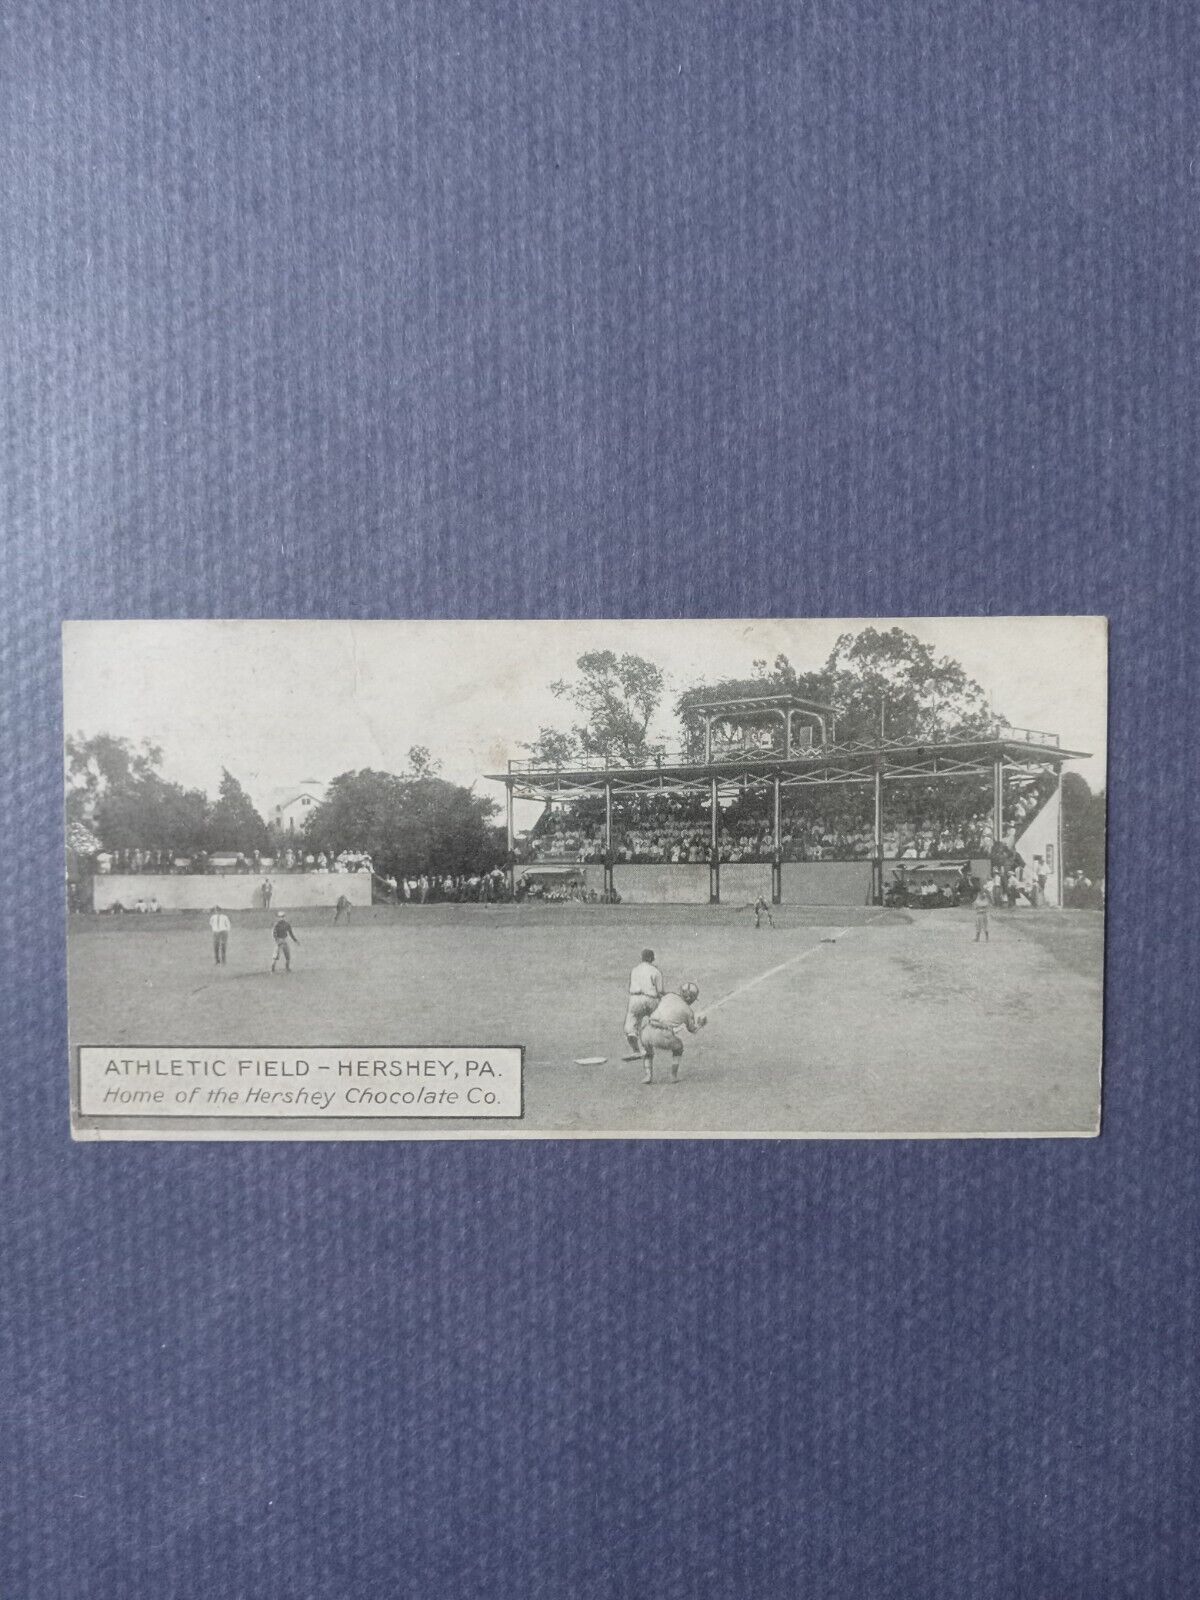 Hershey, PA Athletic Field Postcard- Early 20th Century Baseball Game